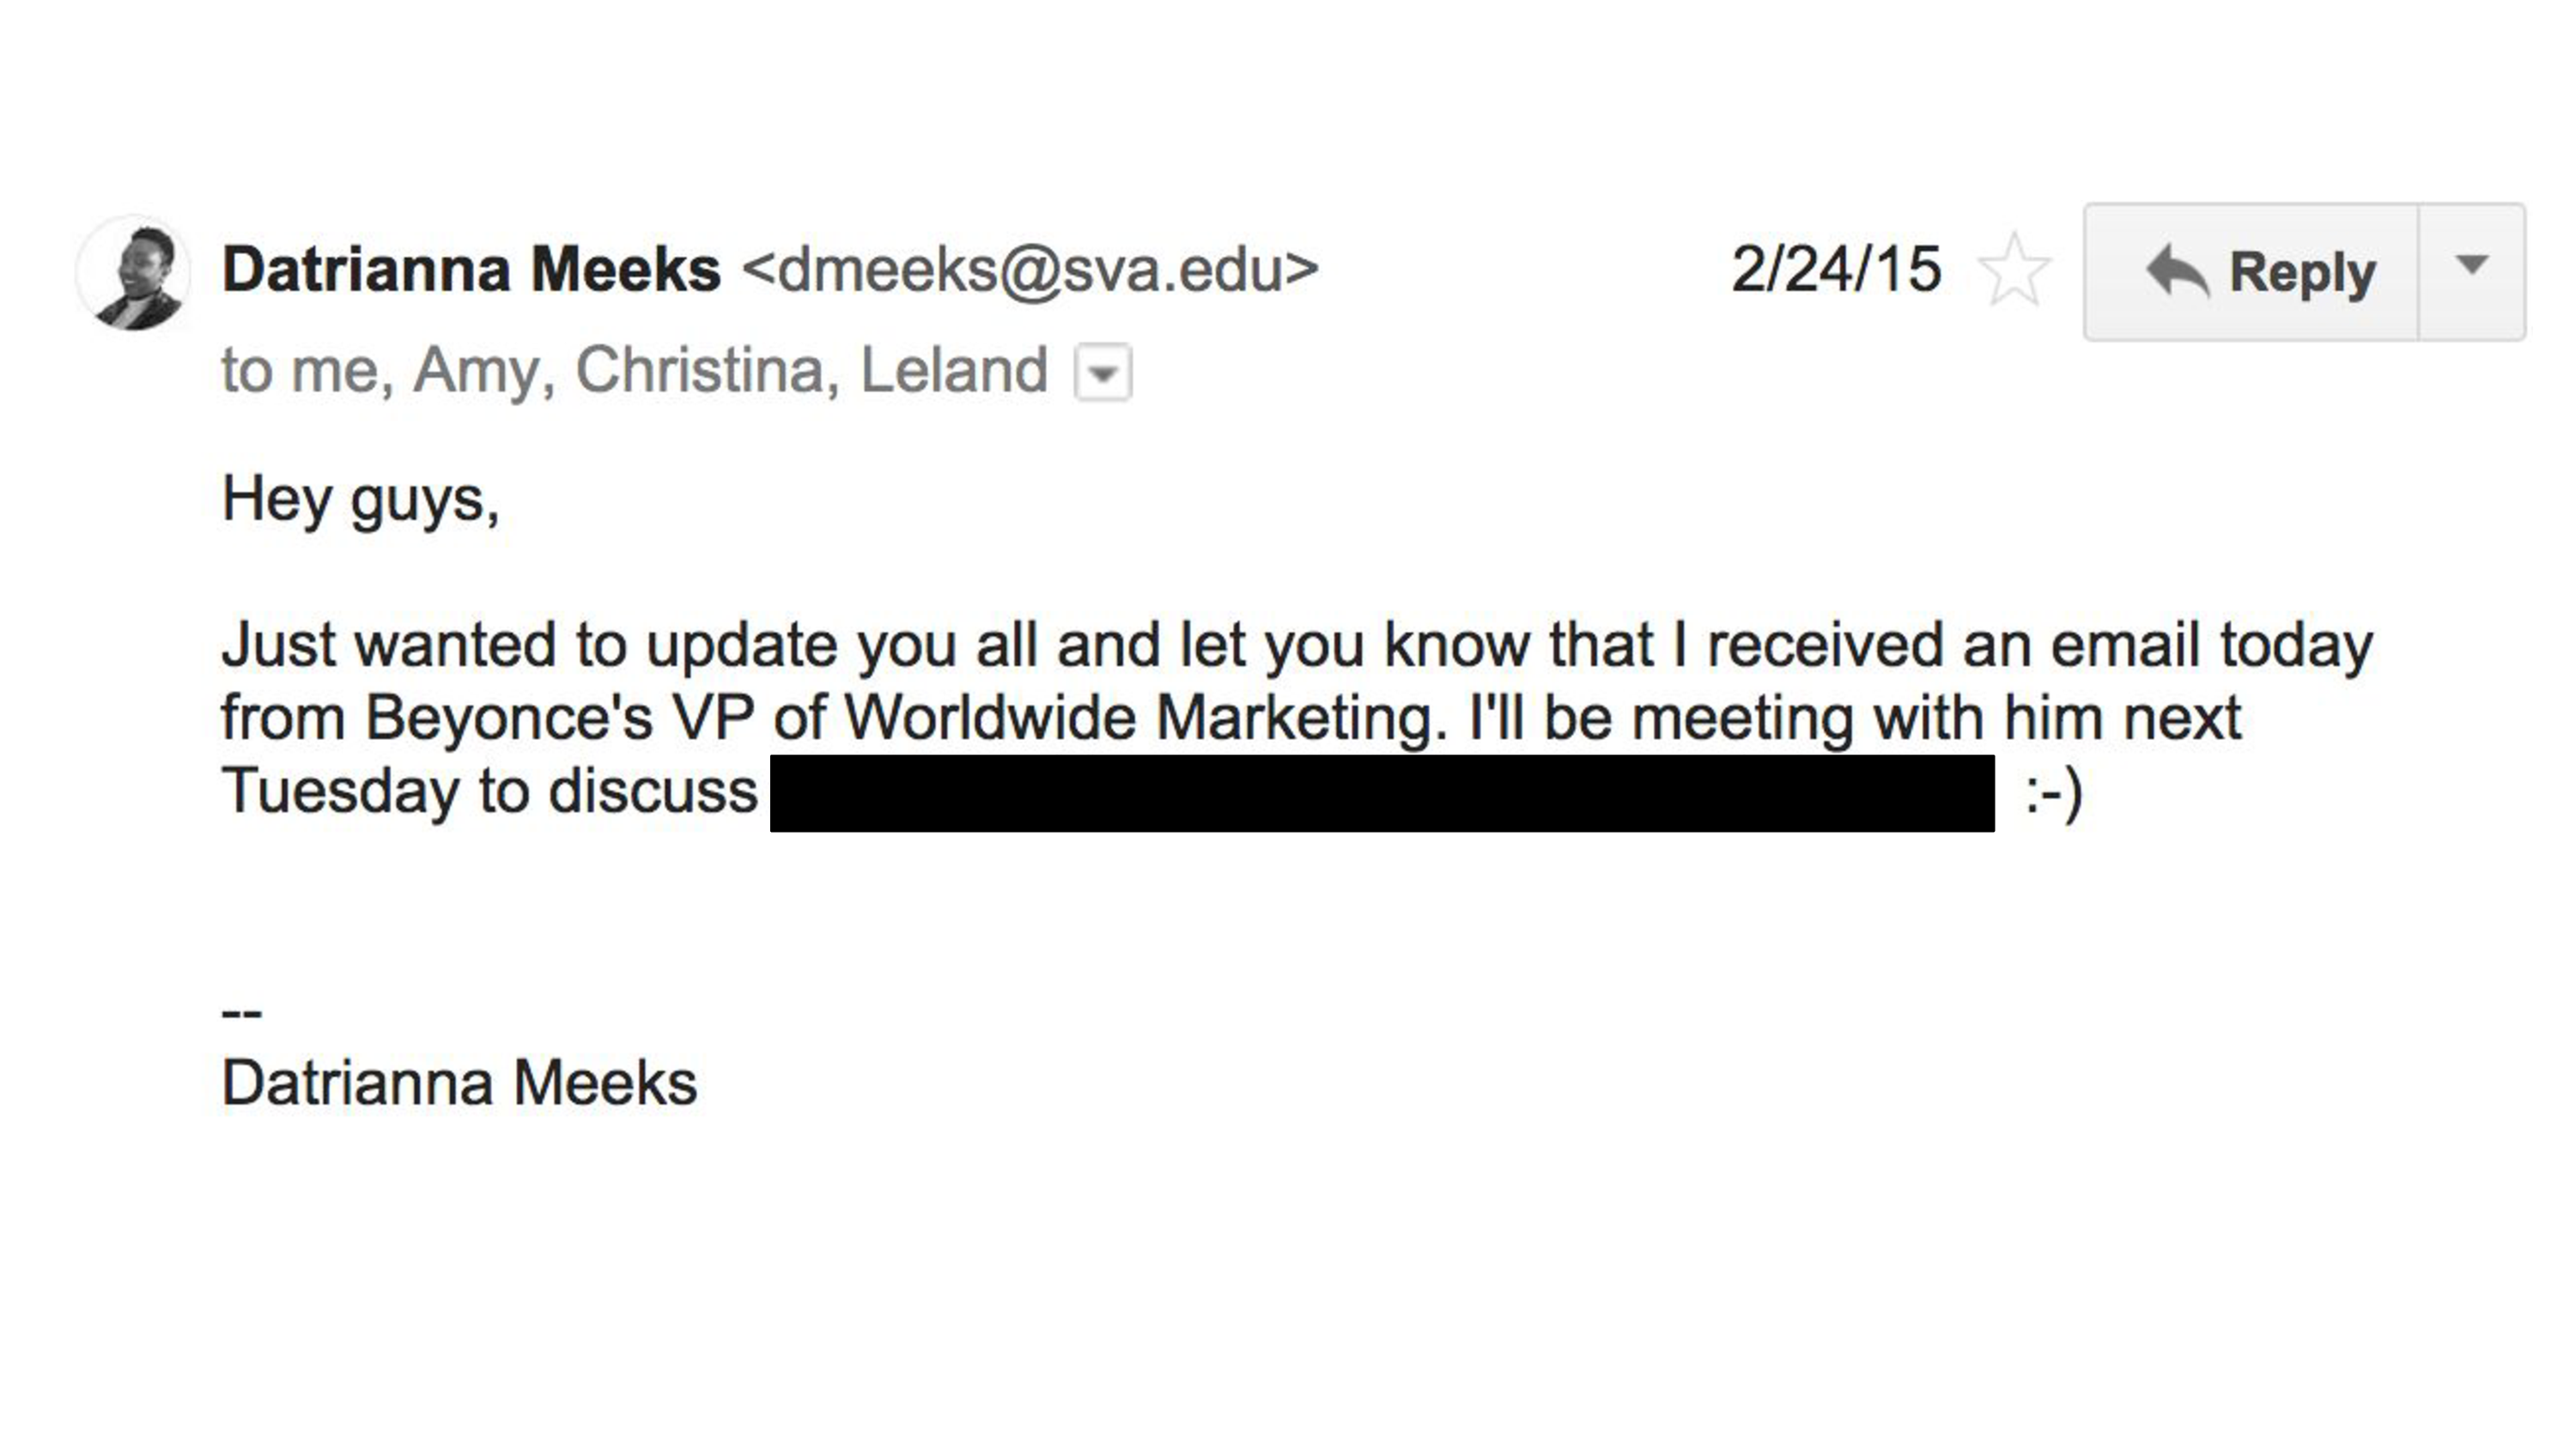 An email from Datrianna Meeks to our teaching team to let us know that she received an email from Beyoncé's VP of Worldwide Marketing as a result of her project.